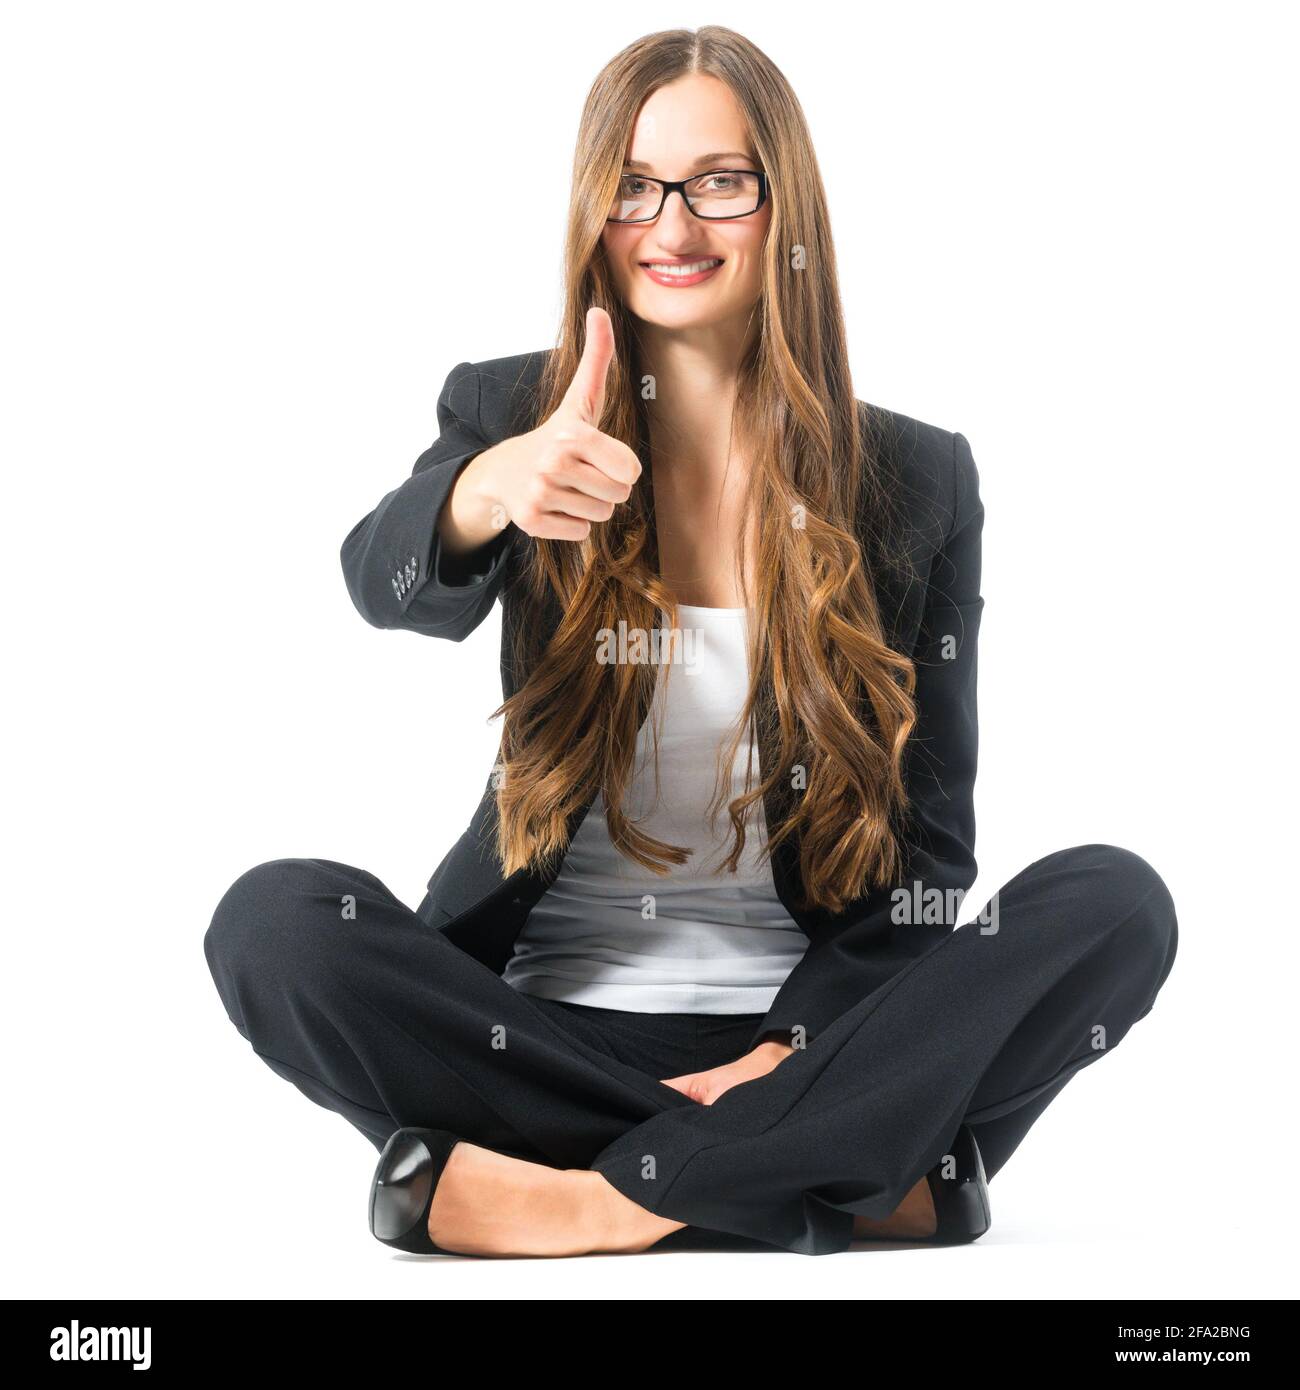 Young woman in front of white background, sitting on the floor, maybe she is a businesswoman or lawyer Stock Photo